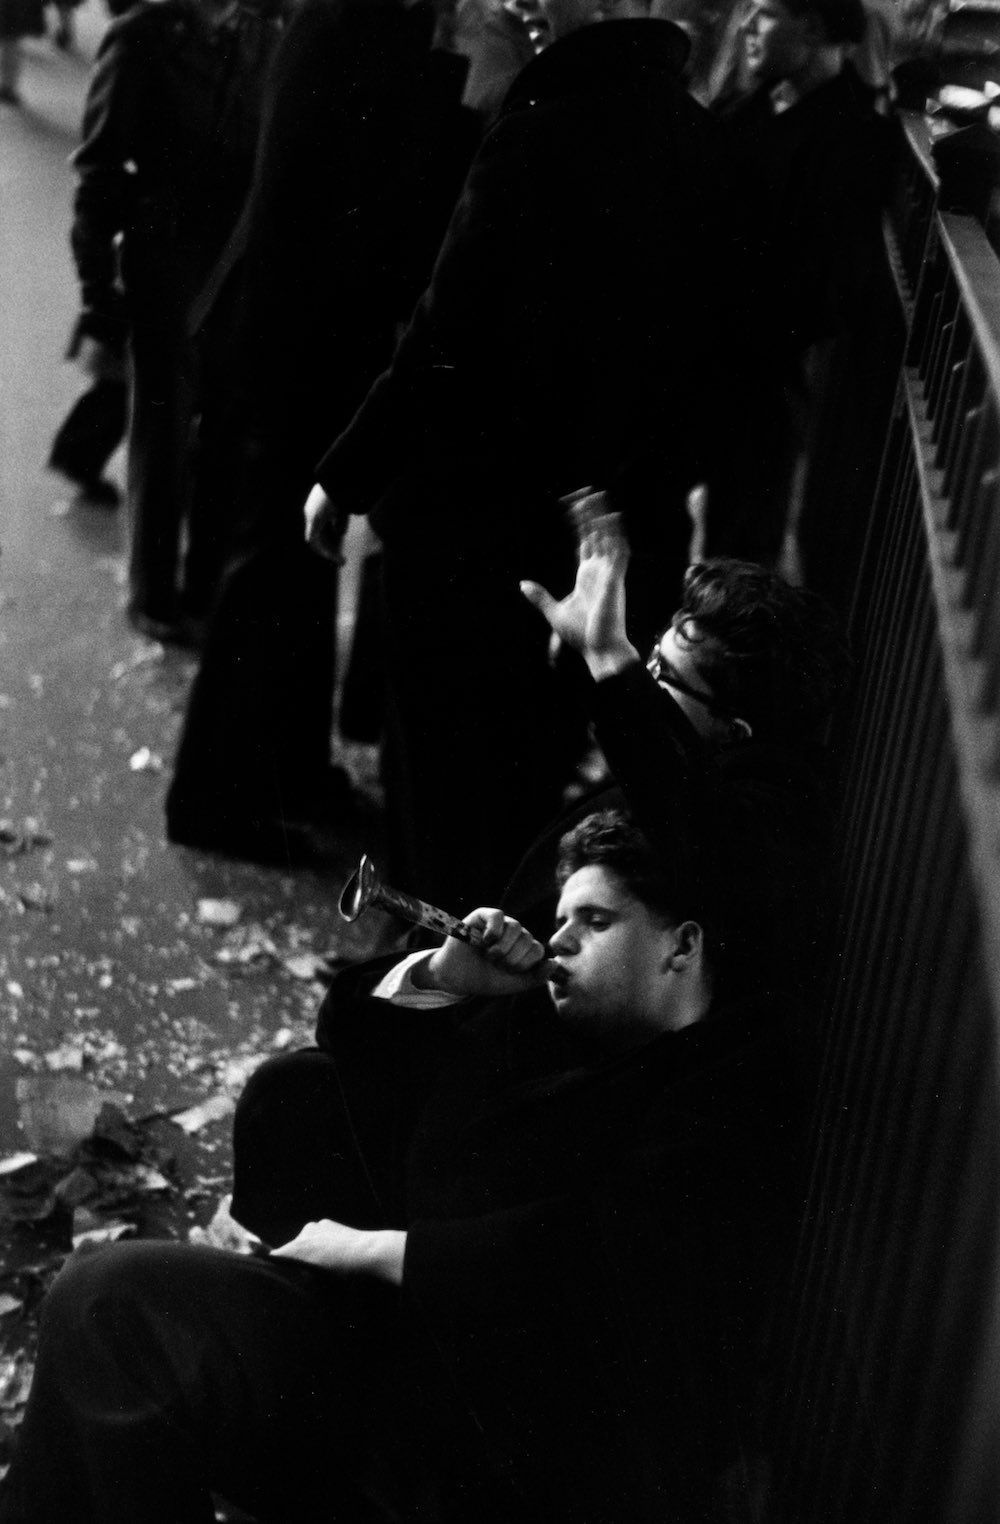 Jan. 1, 1952 A young man slumped against railings blows on a battered toy trumpet during New Year's celebrations in Times Square, New York.